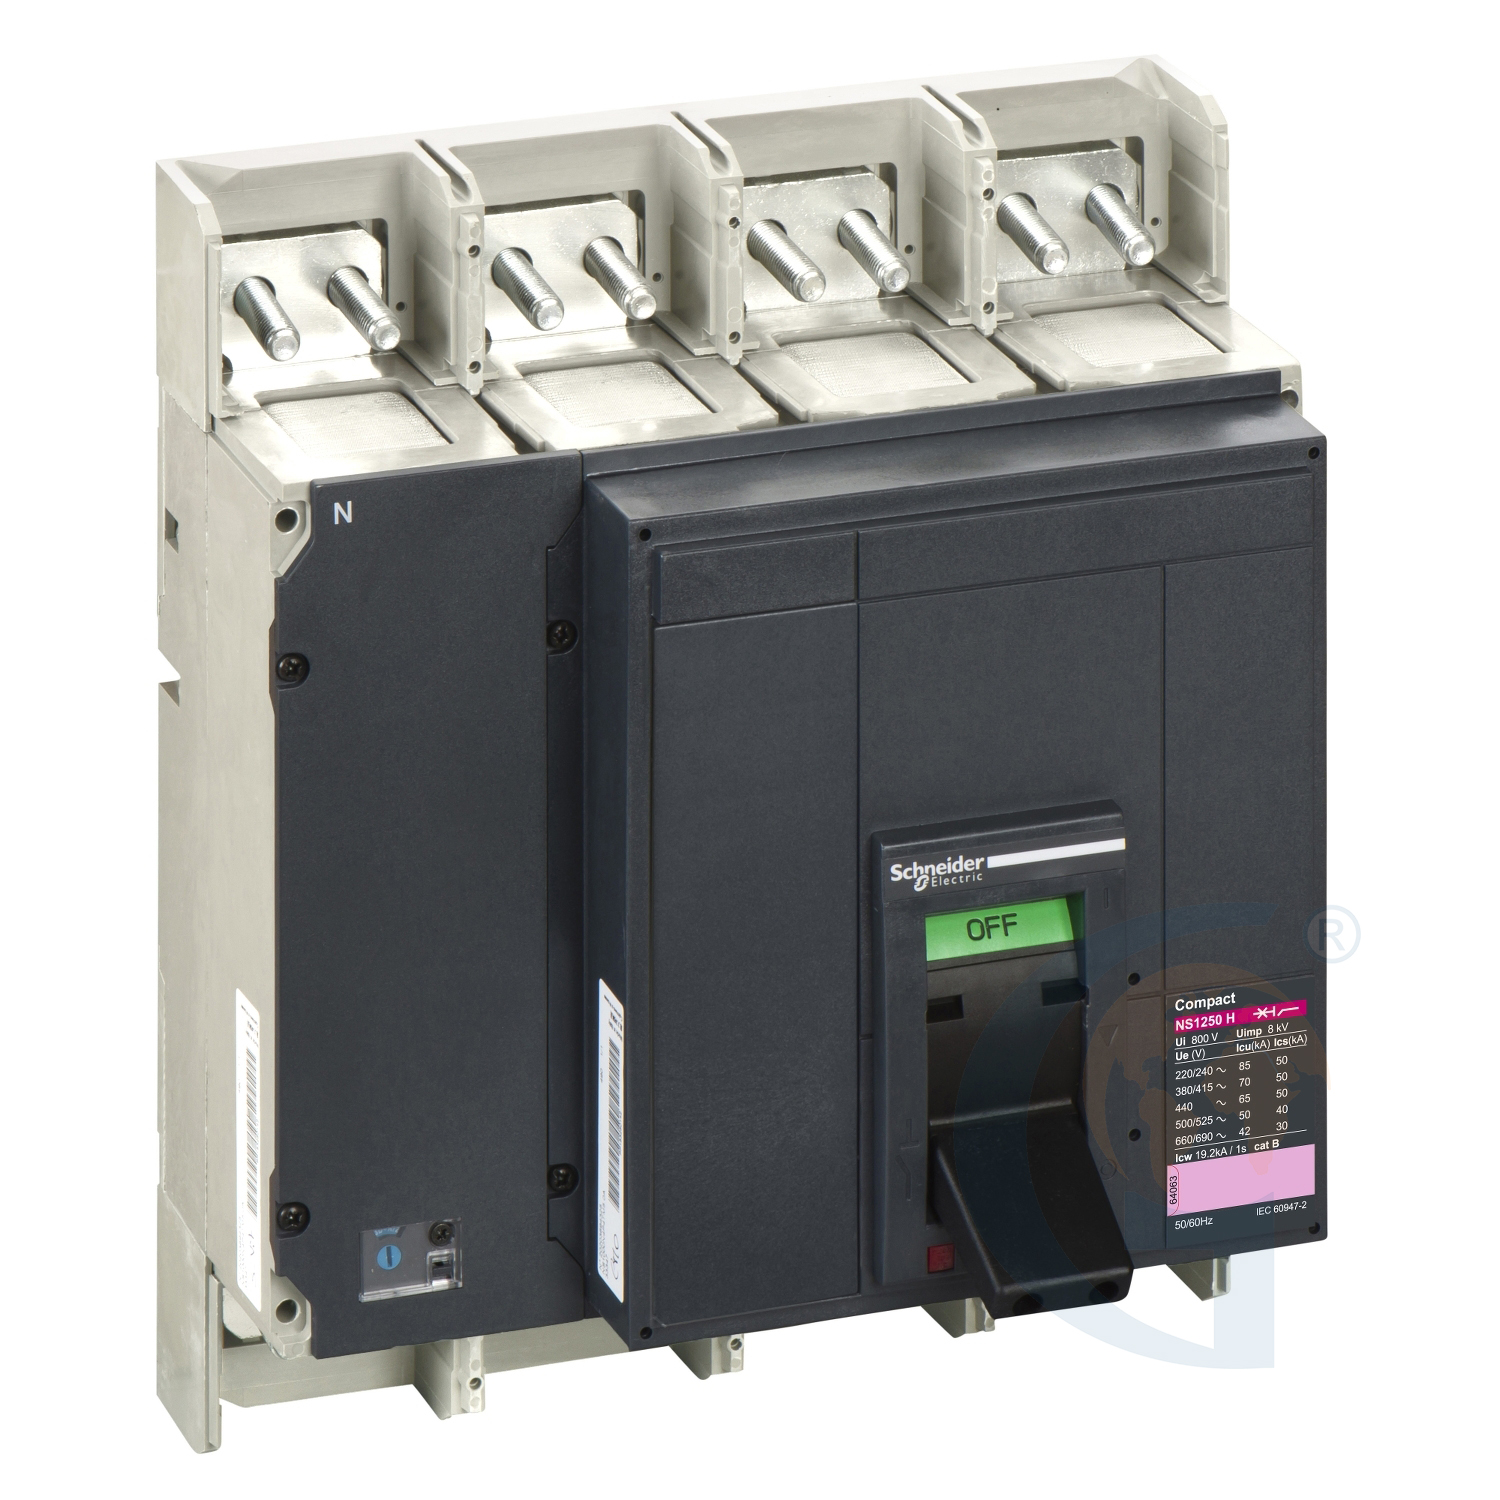 Schneider Electric 33255 circuit breaker basic frame, Compact NS 1250H, 70 kA at 415 VAC, 1250 A, fixed, manually operated, without trip unit, 4P https://gesrepair.com/wp-content/uploads/2020/Schneider/Schneider_Electric_33255_.jpg